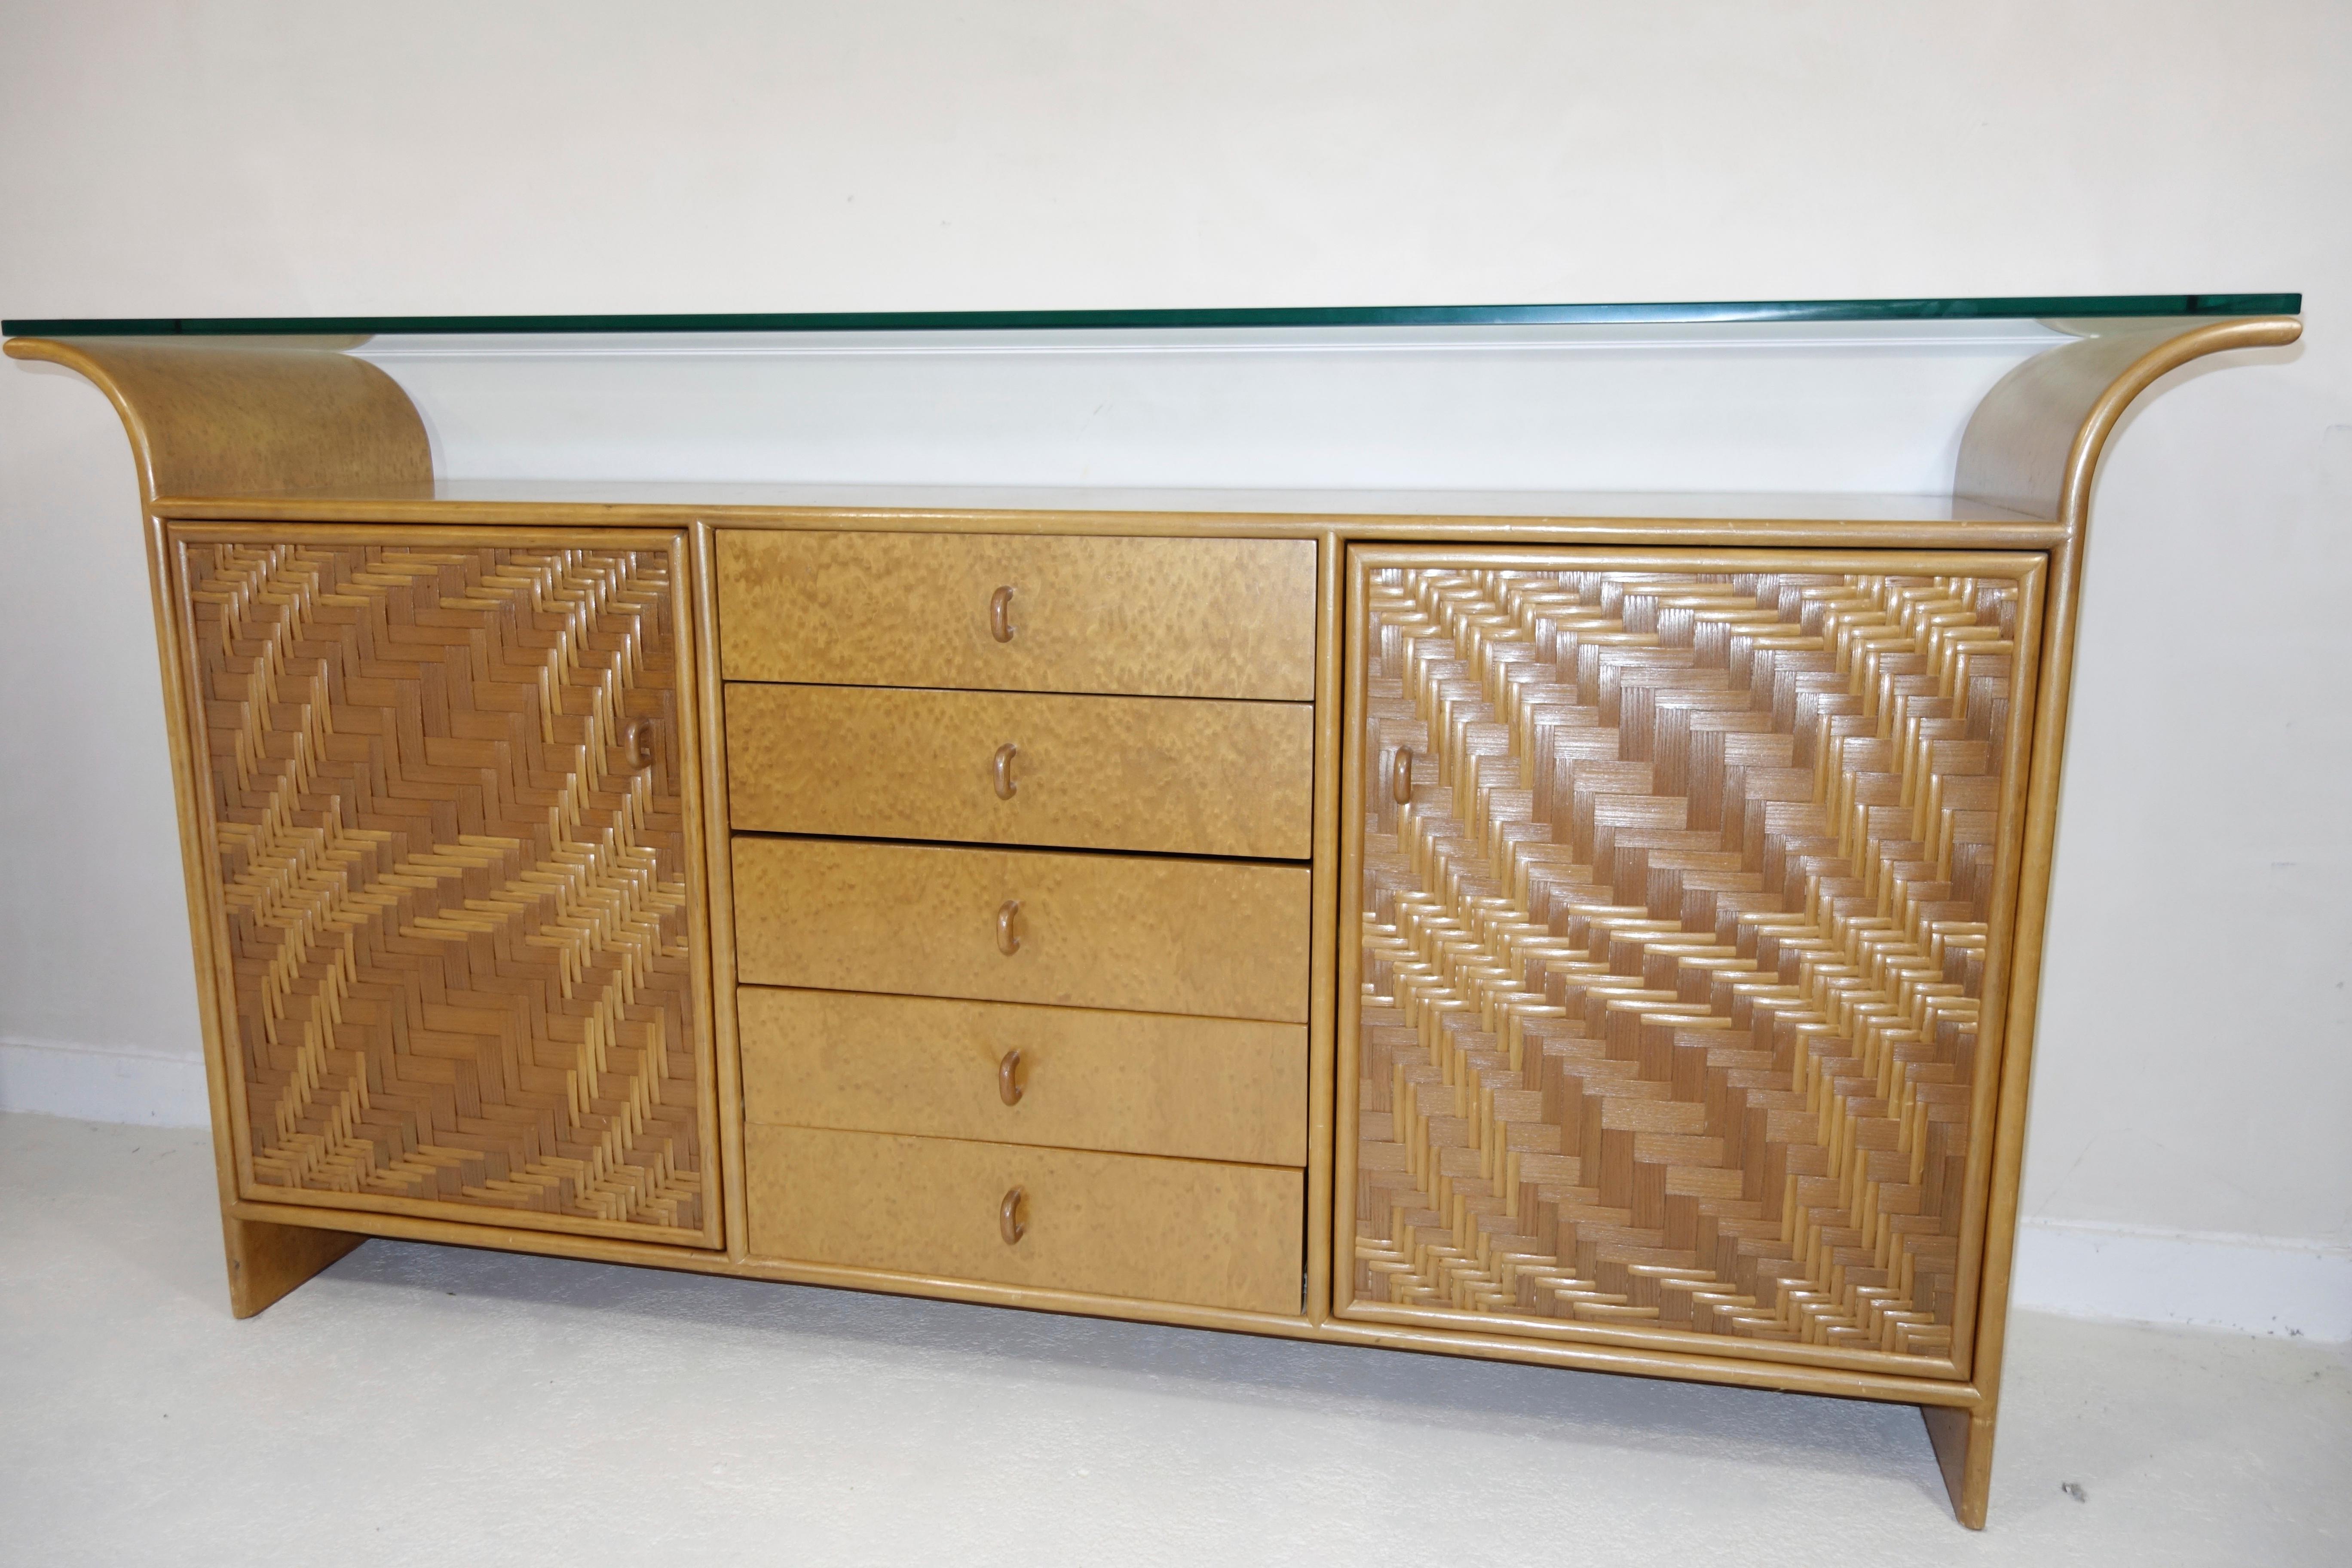 Lovely credenza in Hollywood Regency style made of wood and faux bamboo.
The sideboard has two doors on the sides and five drawers in the middle.
It is elegantly crowned by a thick glass top permitting display space both underneath and on top of